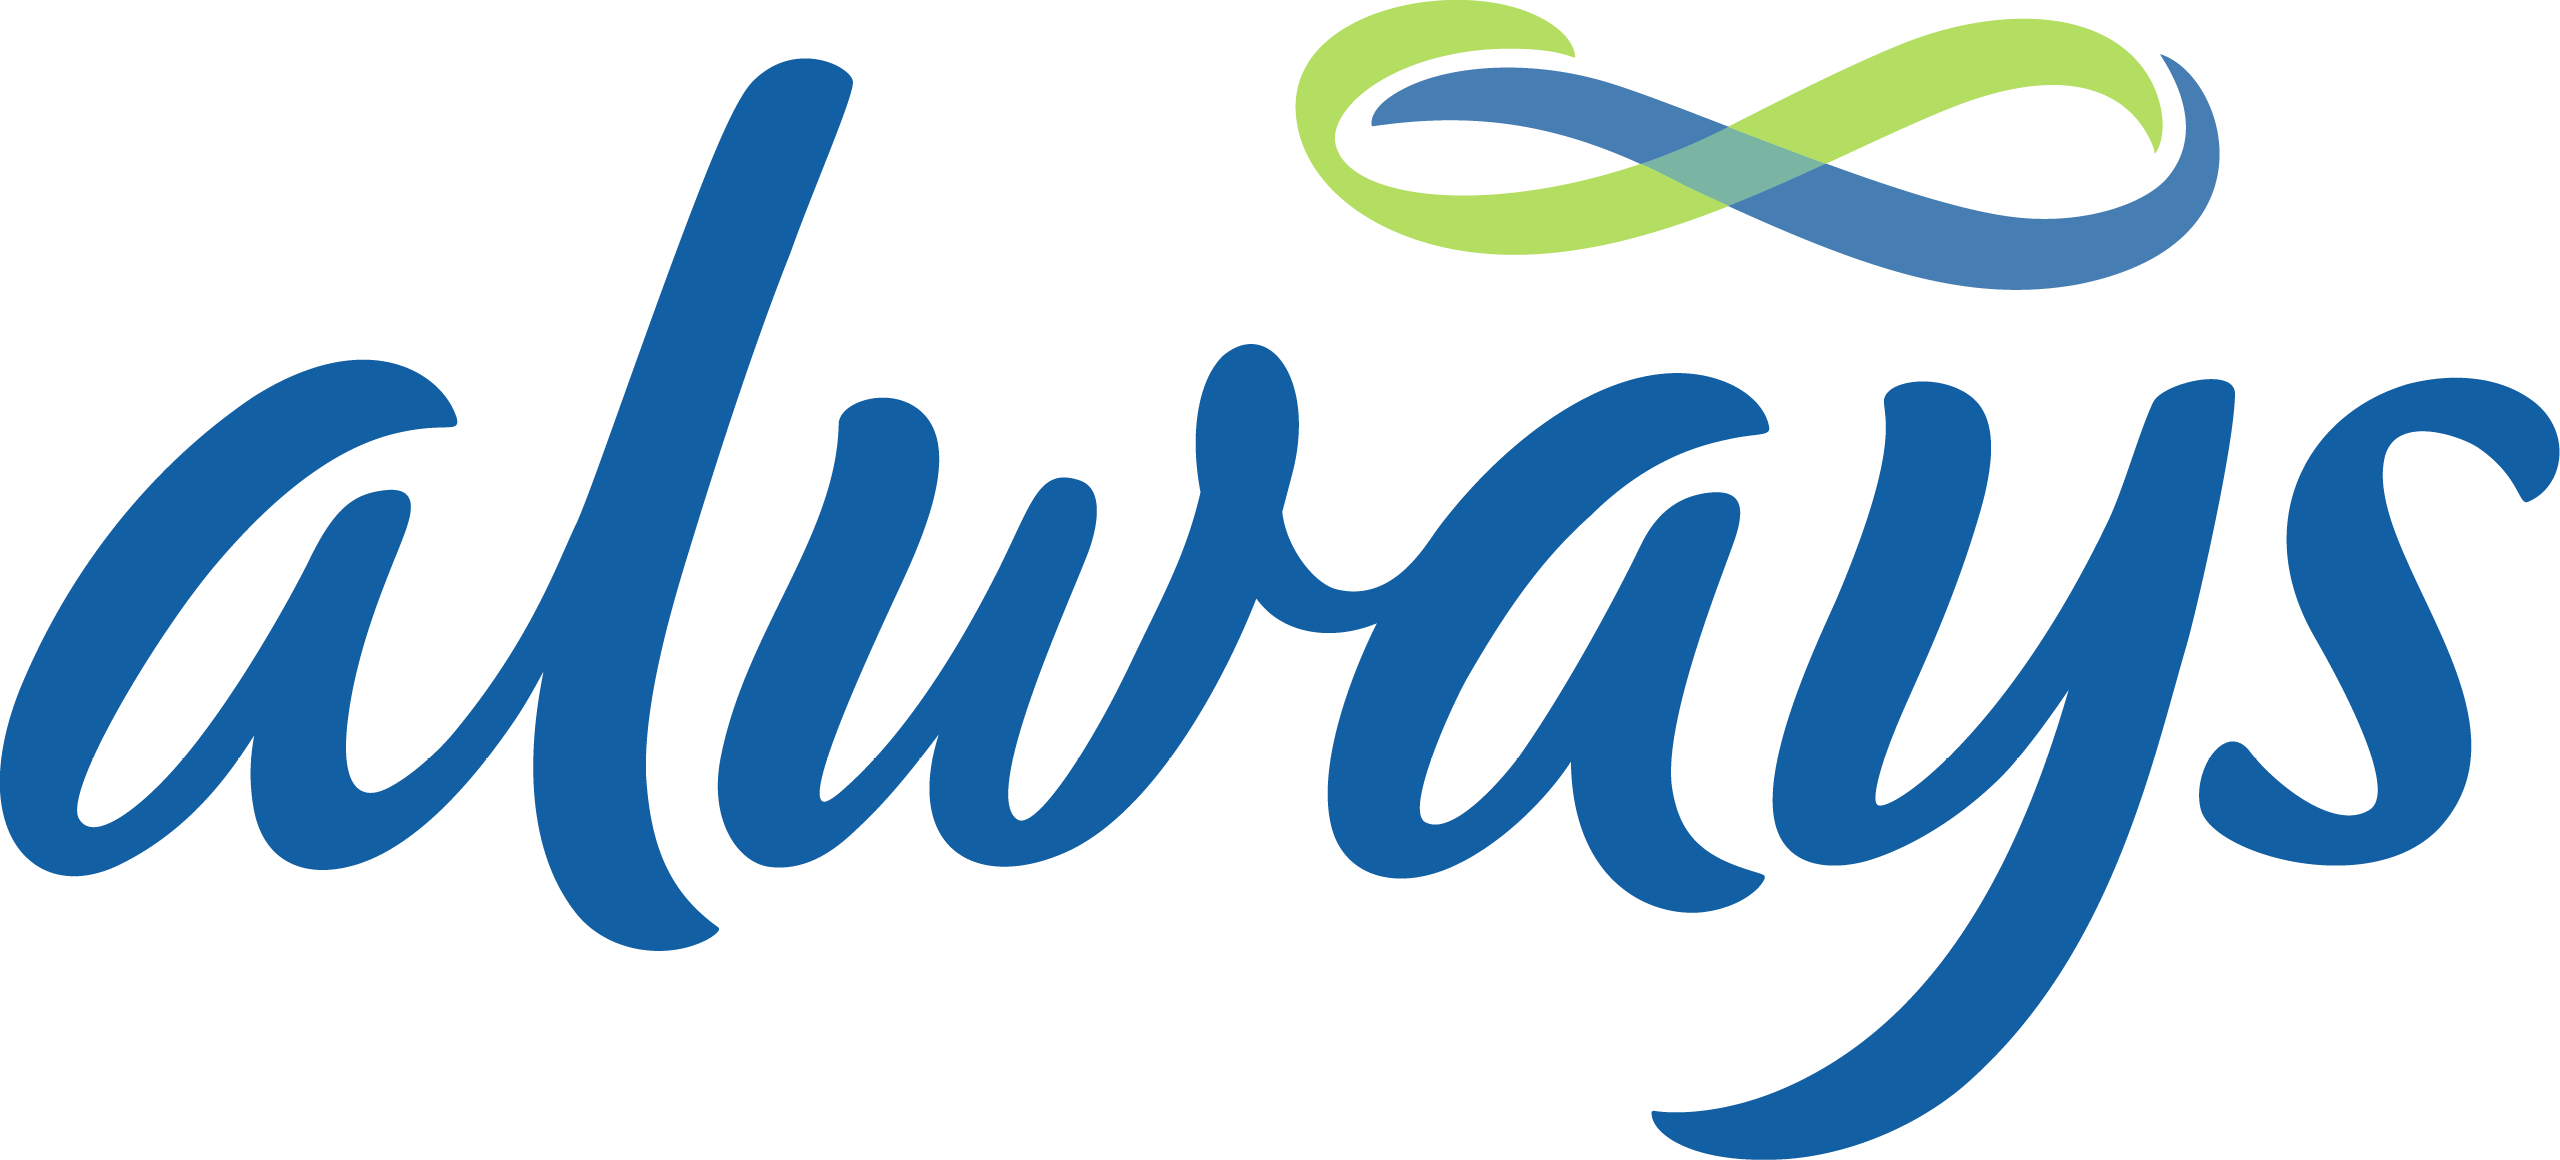 Always Logo.png - Always, Transparent background PNG HD thumbnail